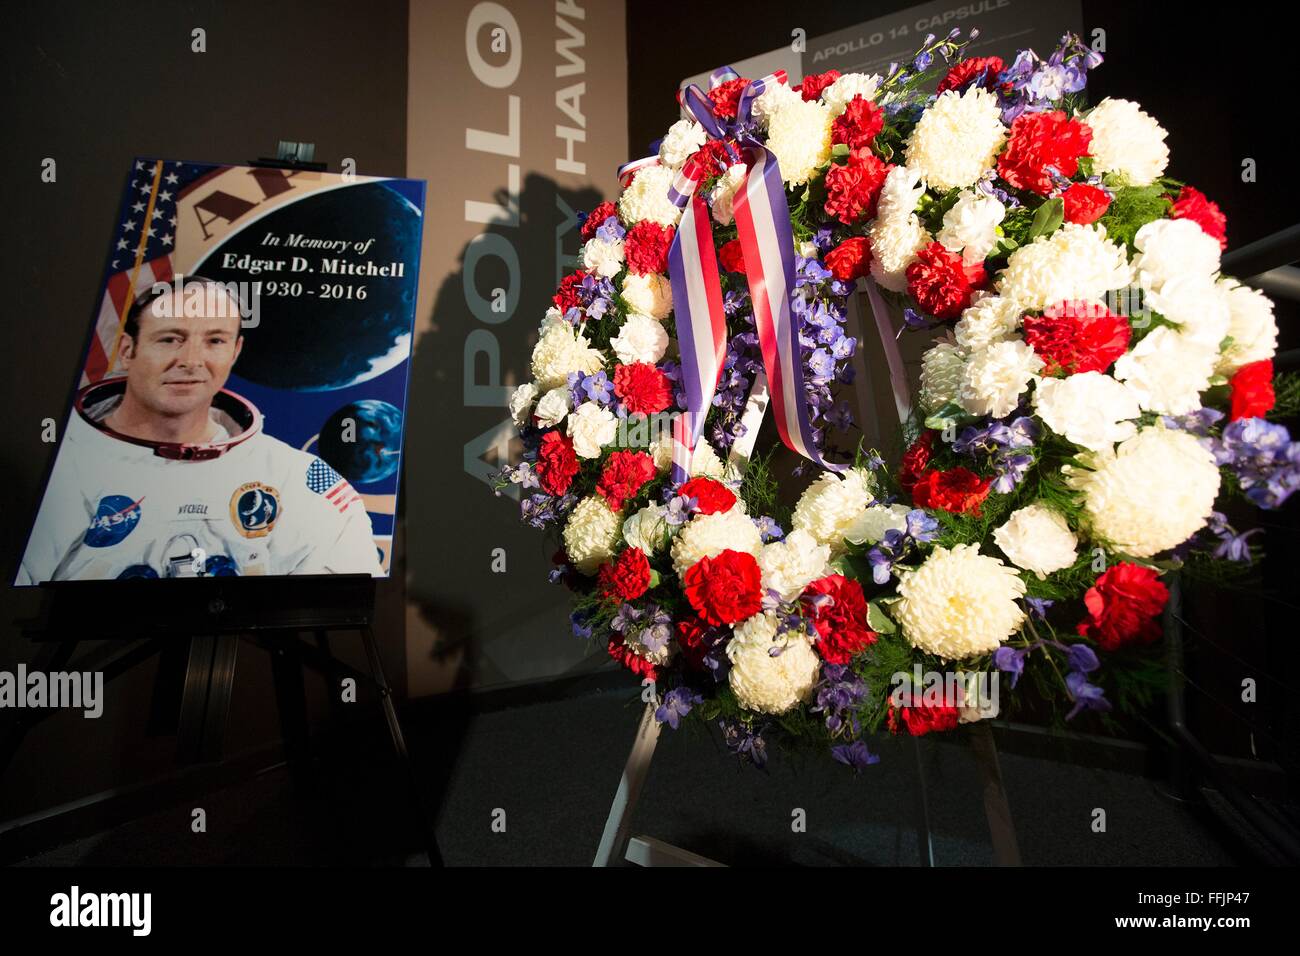 A memorial wreath placed next to the Apollo 14 command module exhibit at the Saturn V Building to honor the memory of former NASA astronaut Edgar Mitchell at the Kennedy Space Center February 12, 2016 in Cape Canaveral, Florida. Mitchell, one of 12 humans to walk on the moon died February 4, 2016. Stock Photo